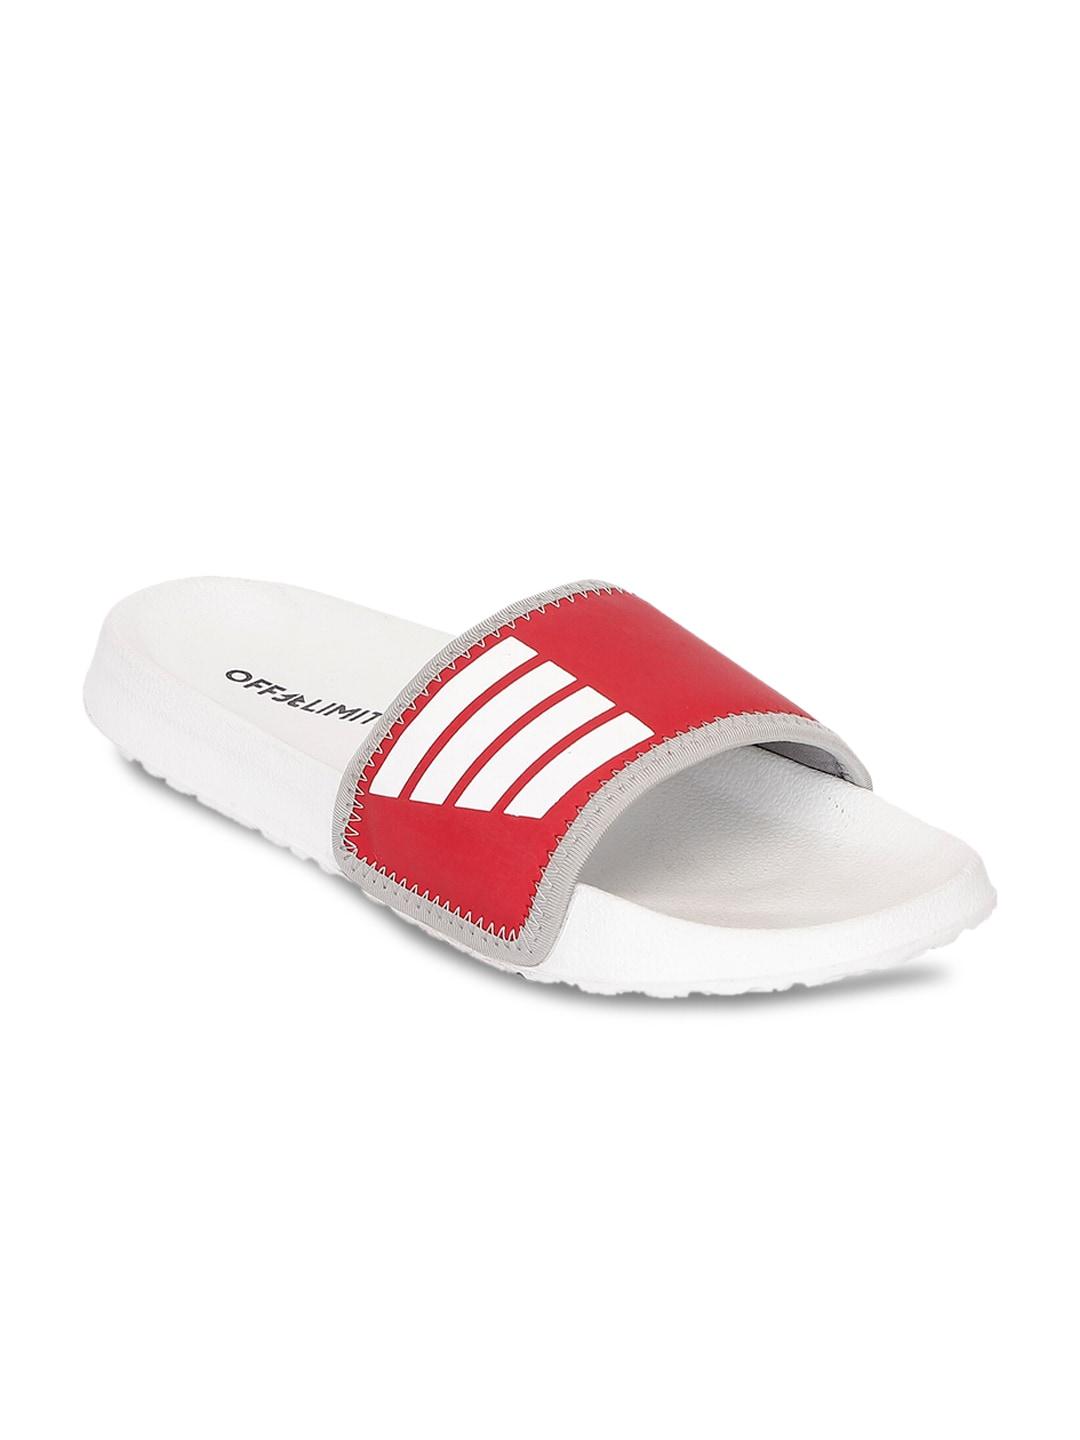 off limits women red & white striped sliders